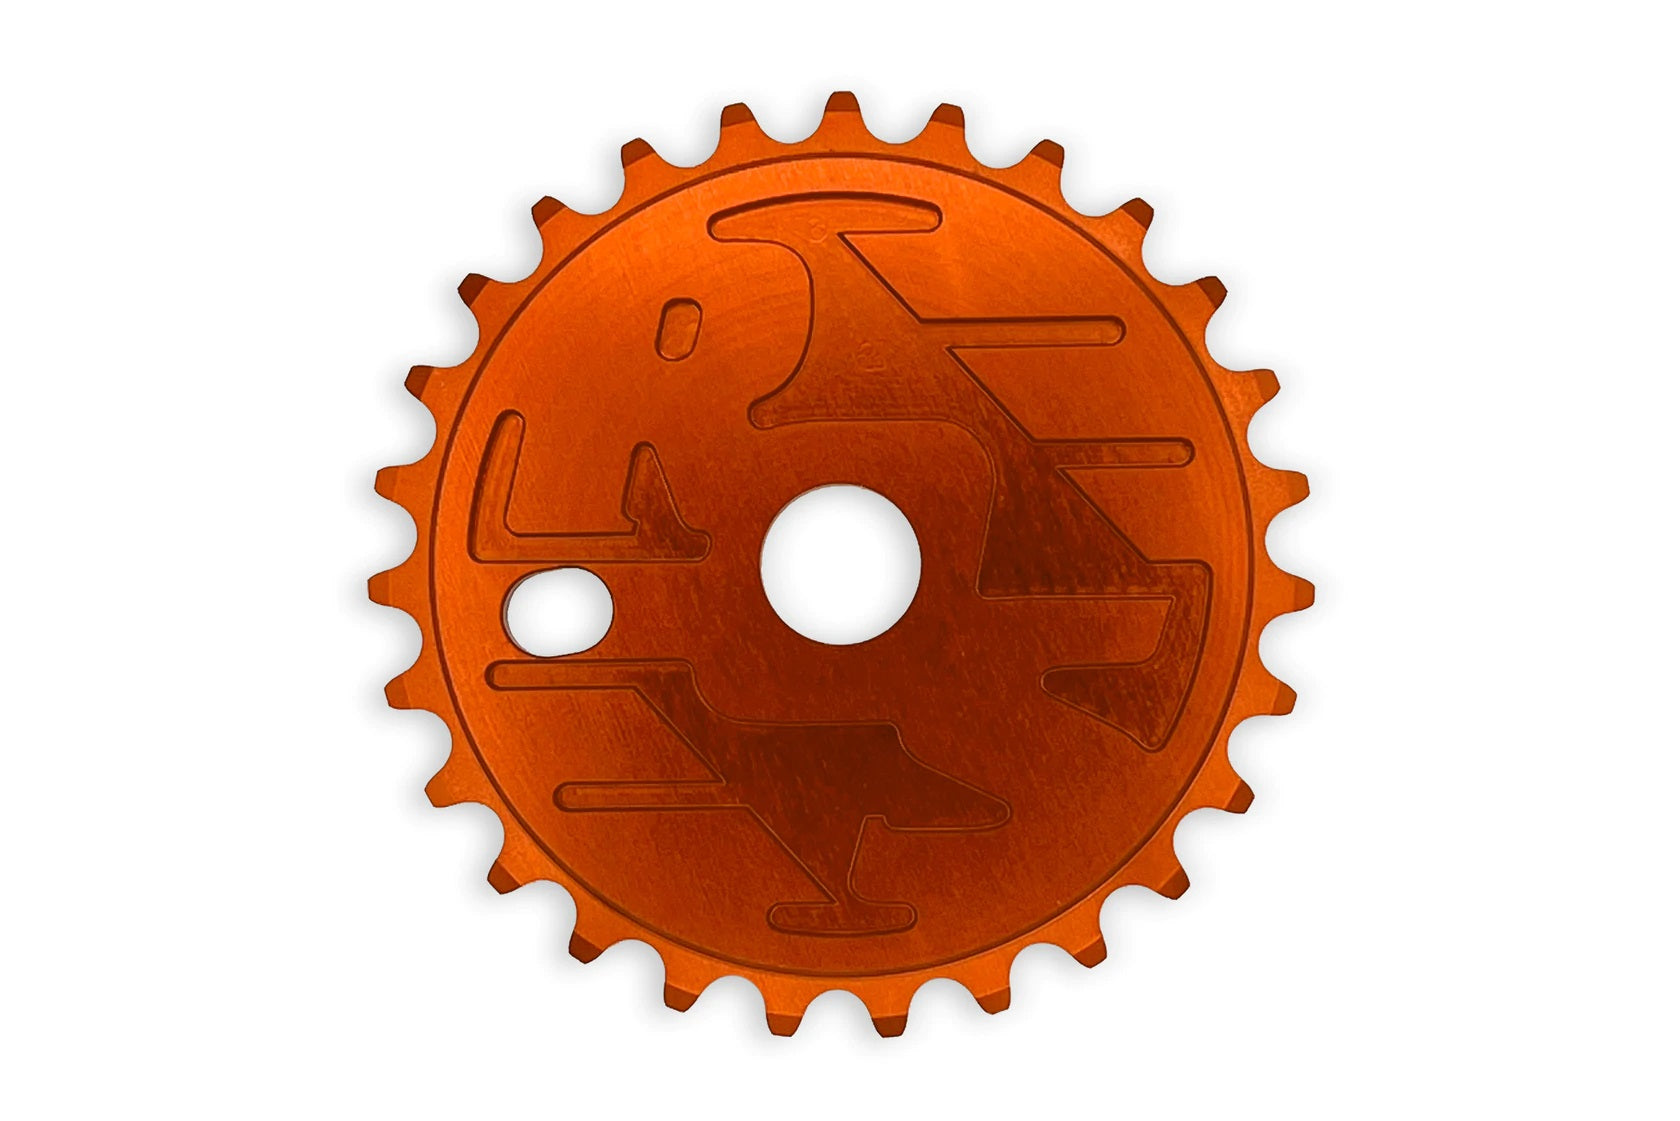 Ride Out Supply Sprocket - 19mm Spindle  (27T)